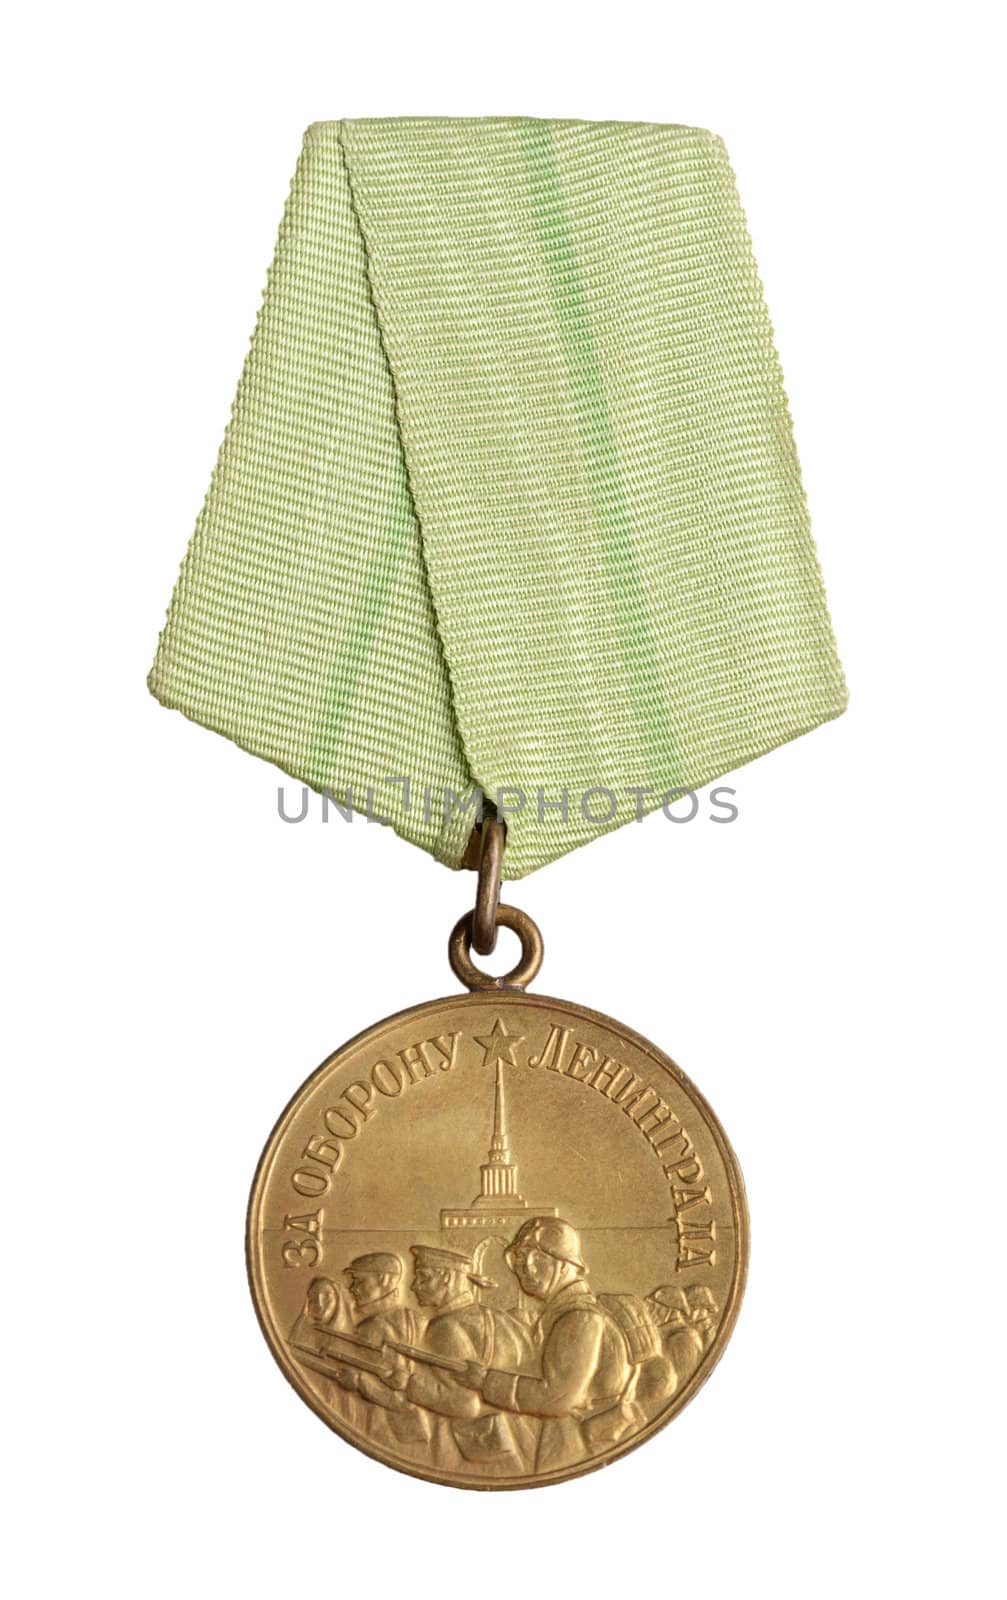 Object on white - russian medal close up